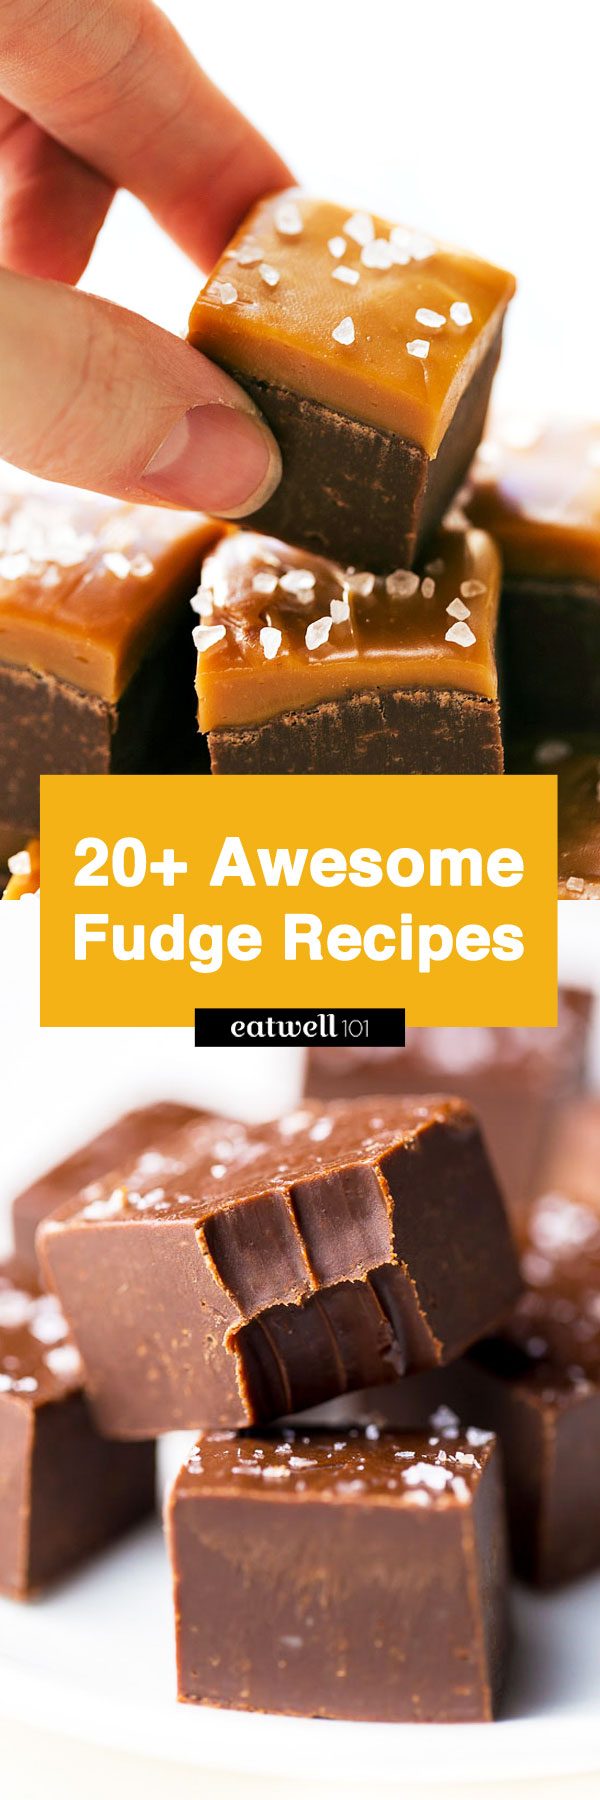 Fudge Recipes: 20+ Awesome Fudge Treats for Holiday Parties — Eatwell101